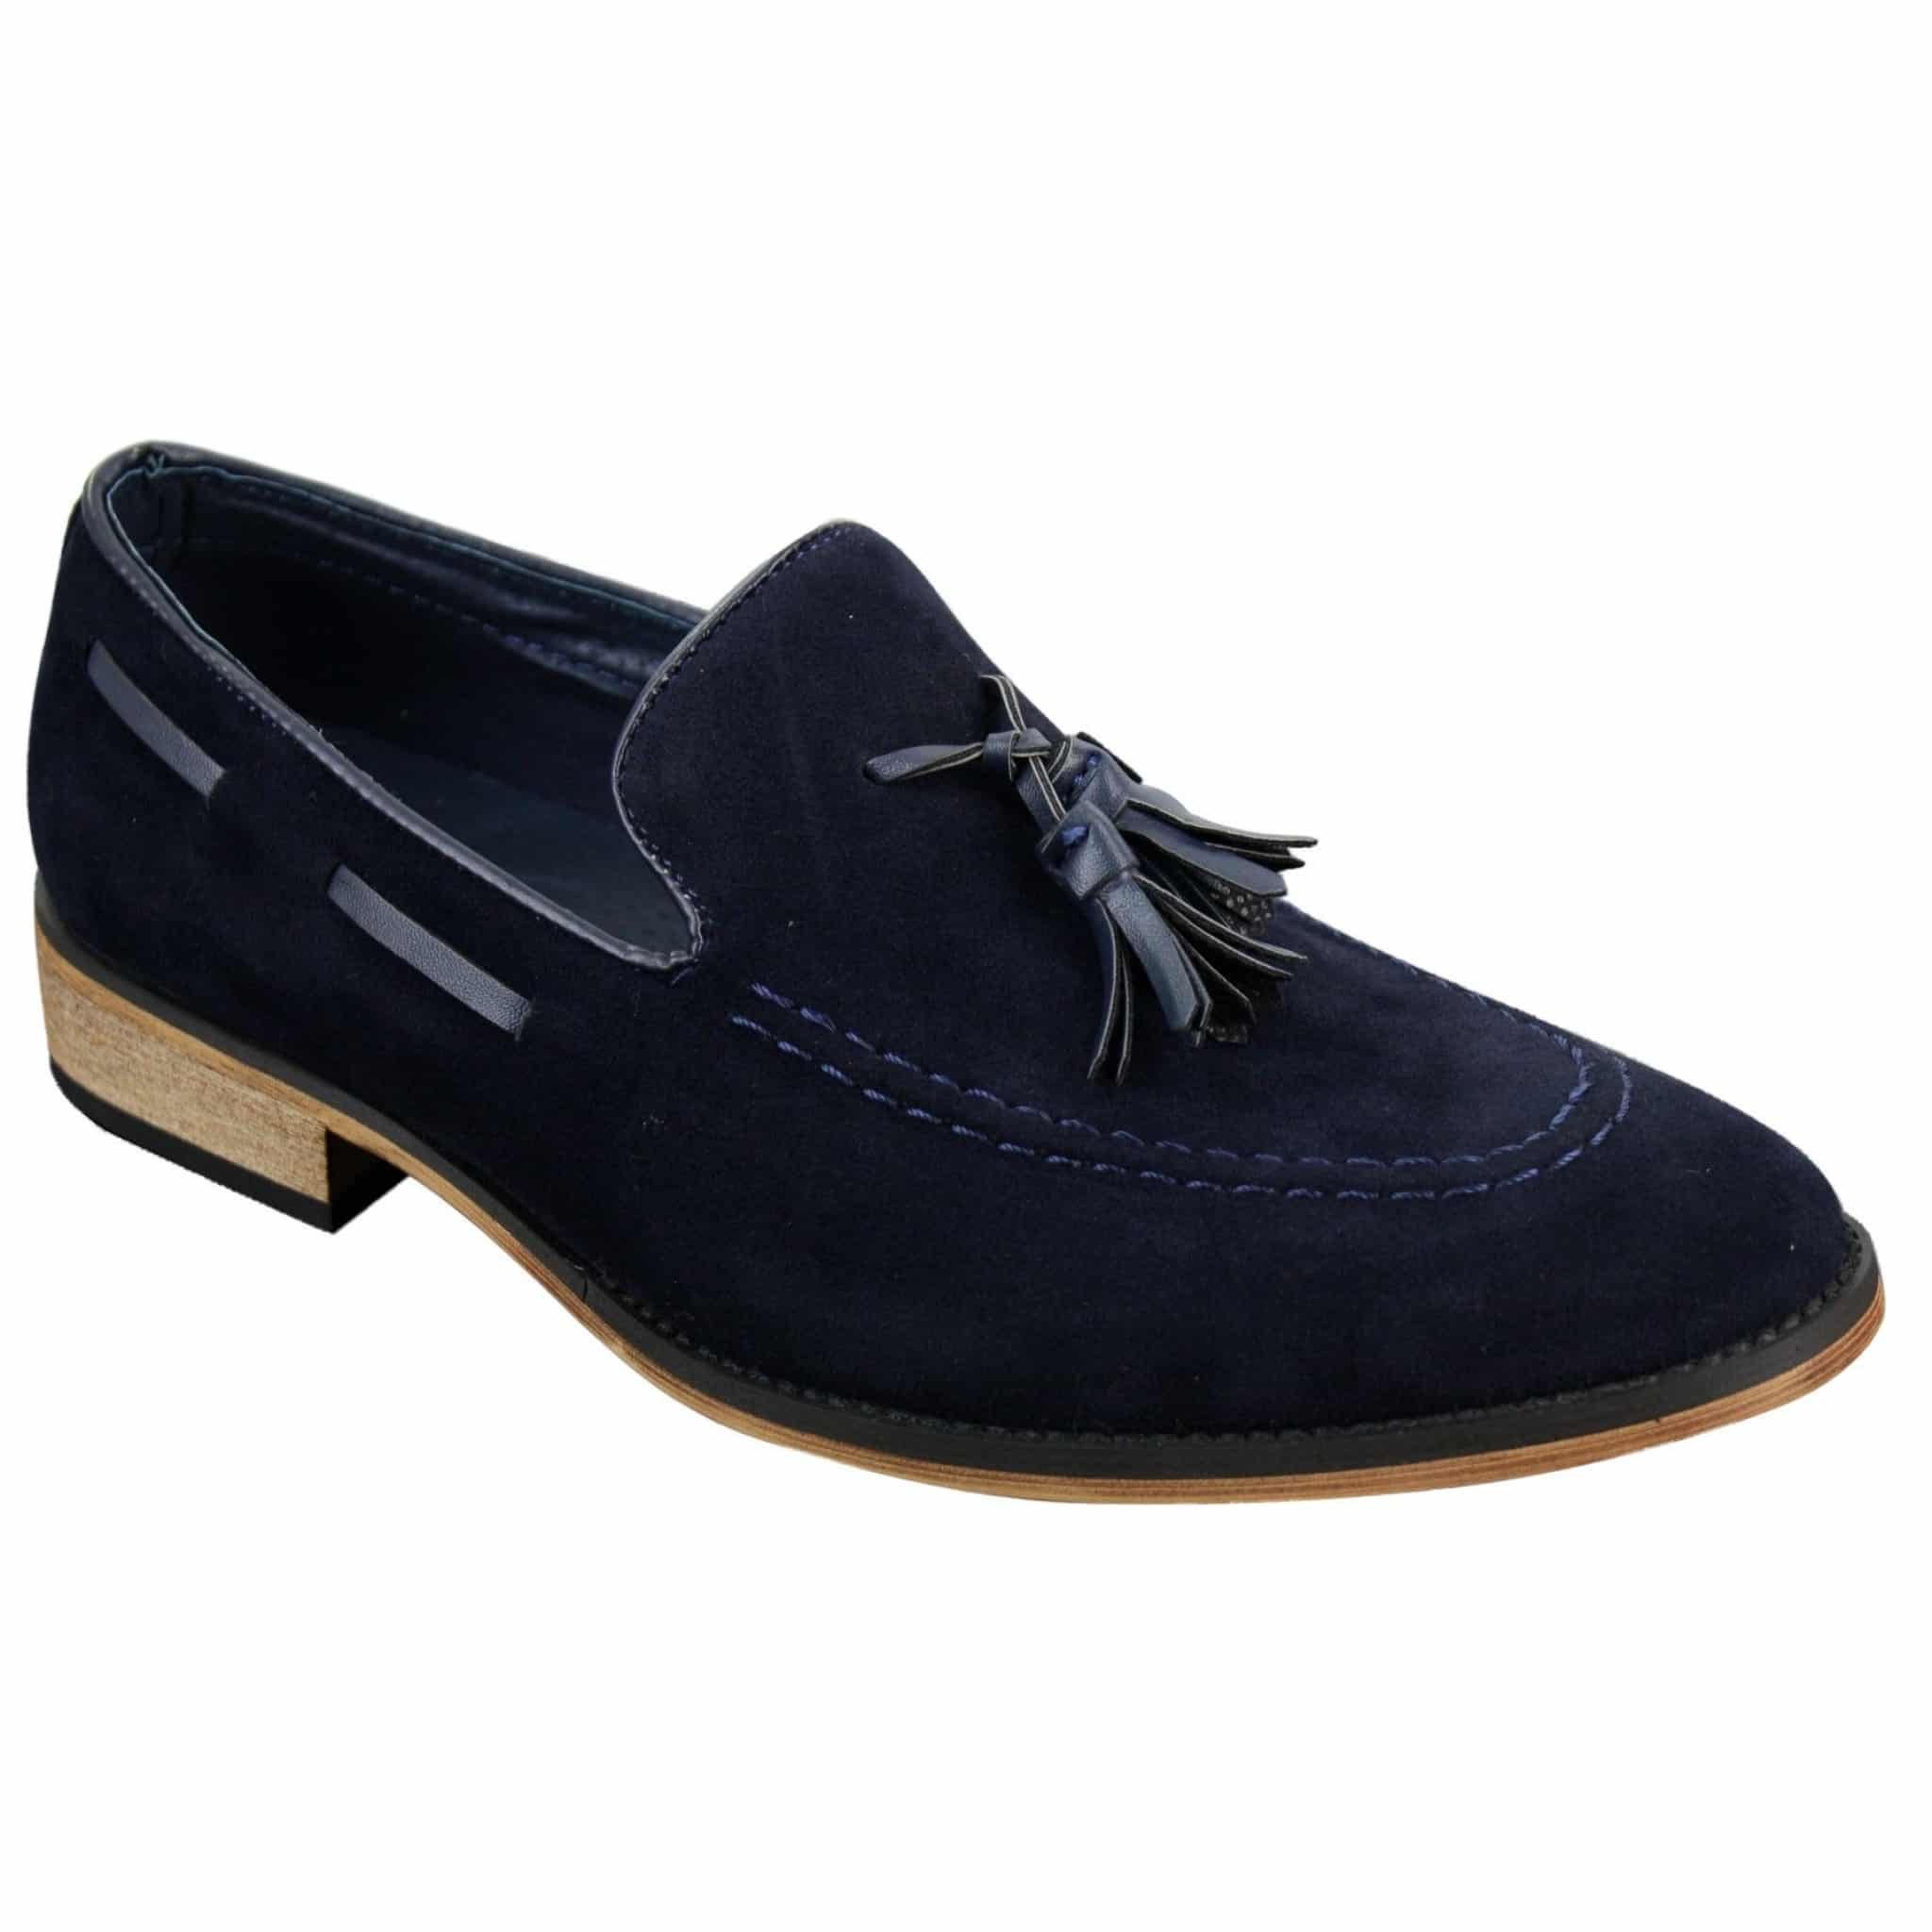 Mens Italian Slip On Driving Shoes Loafers Tassle Suede Leather Blue